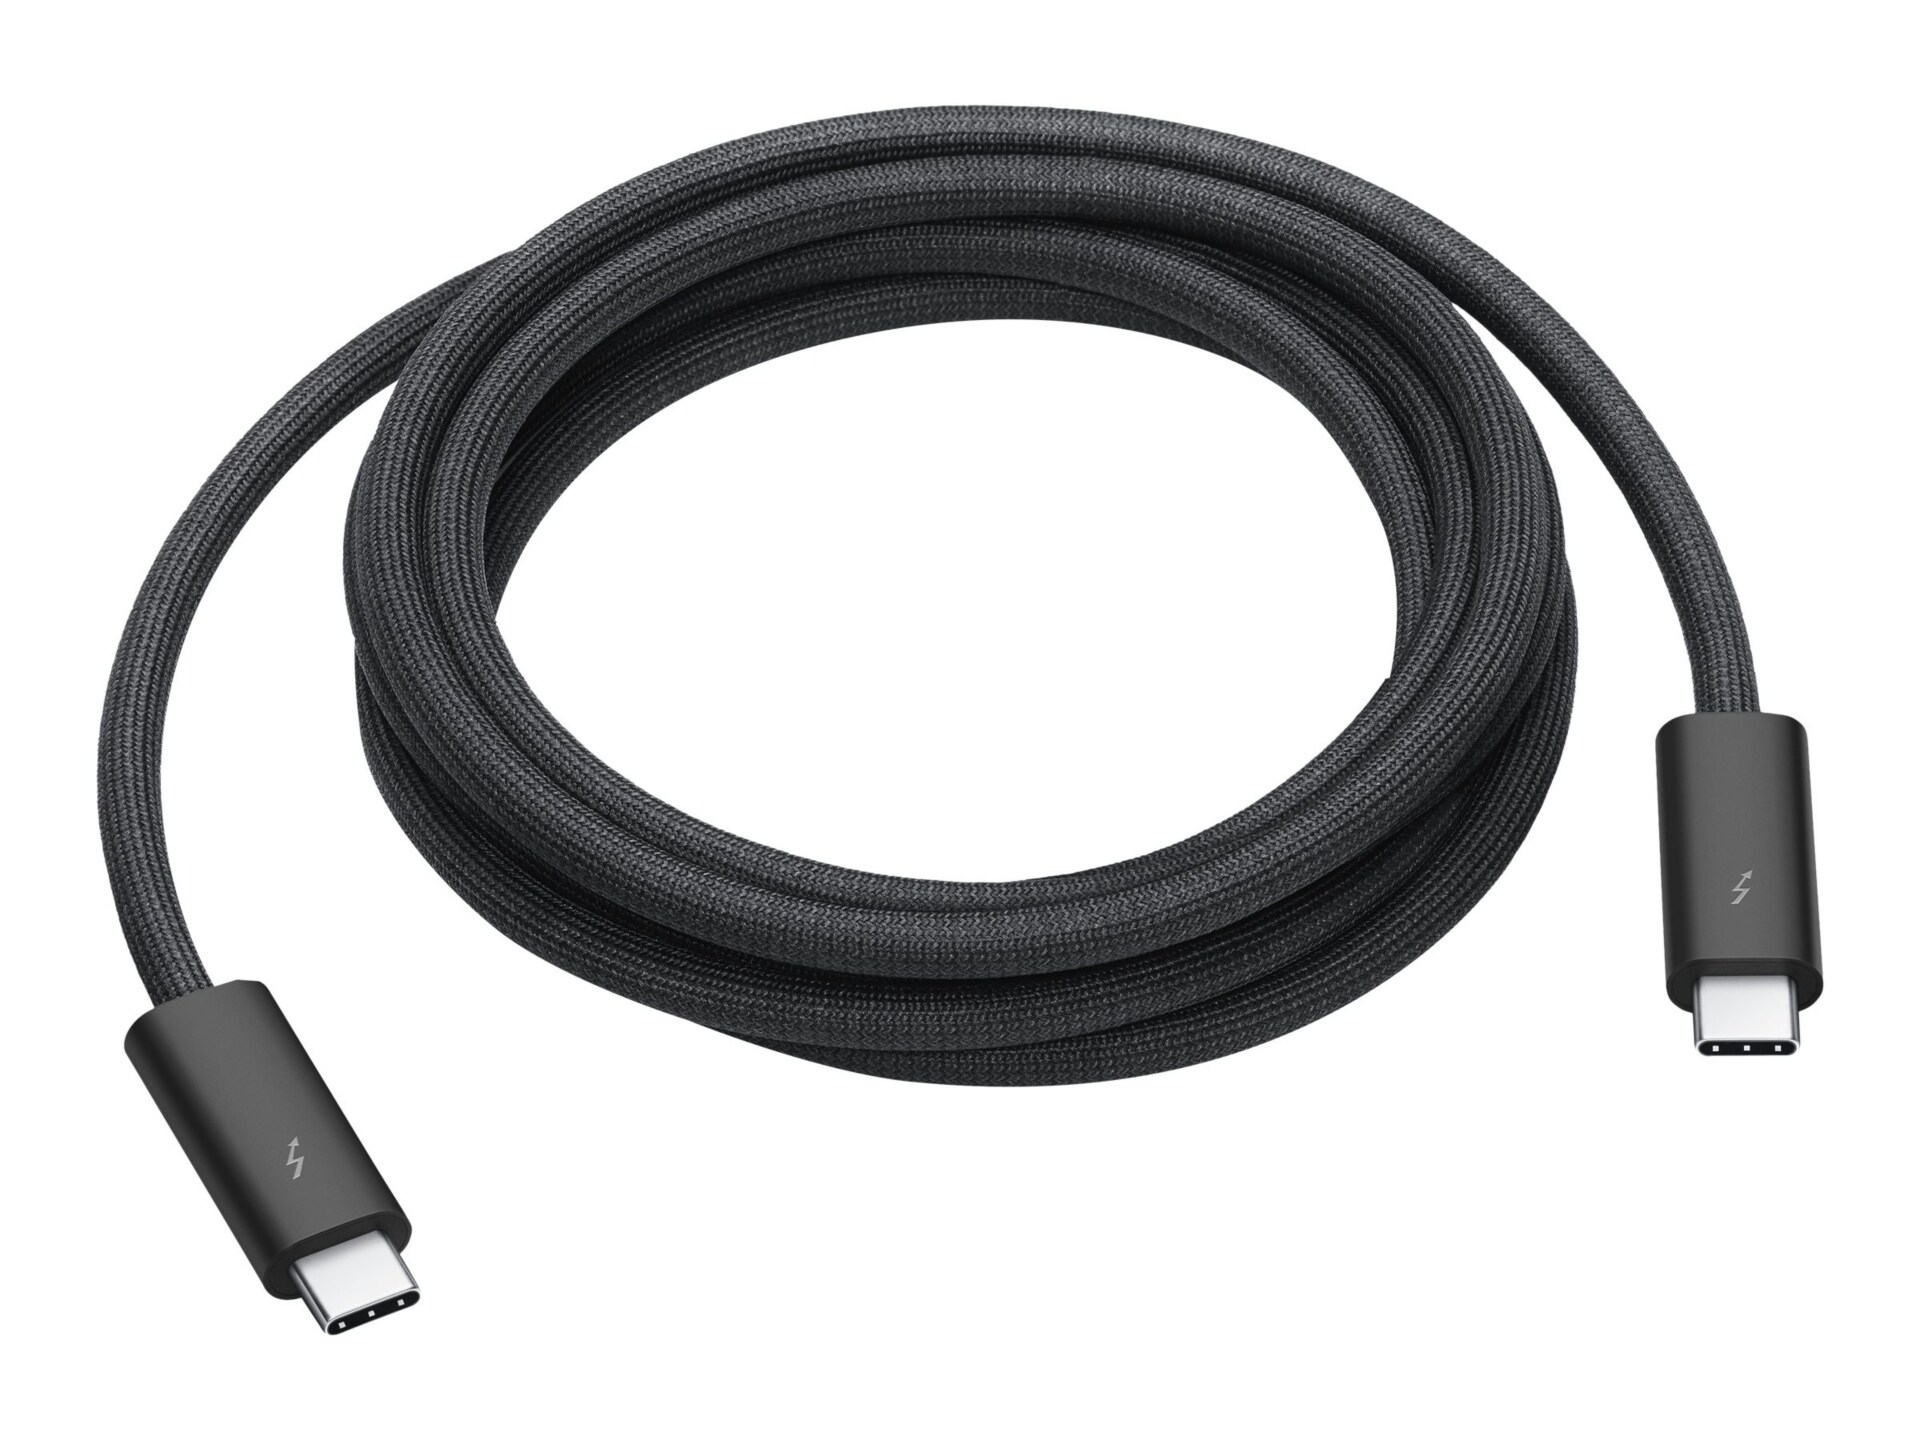 Apple - Thunderbolt cable - USB-C to USB-C - 6.6 ft